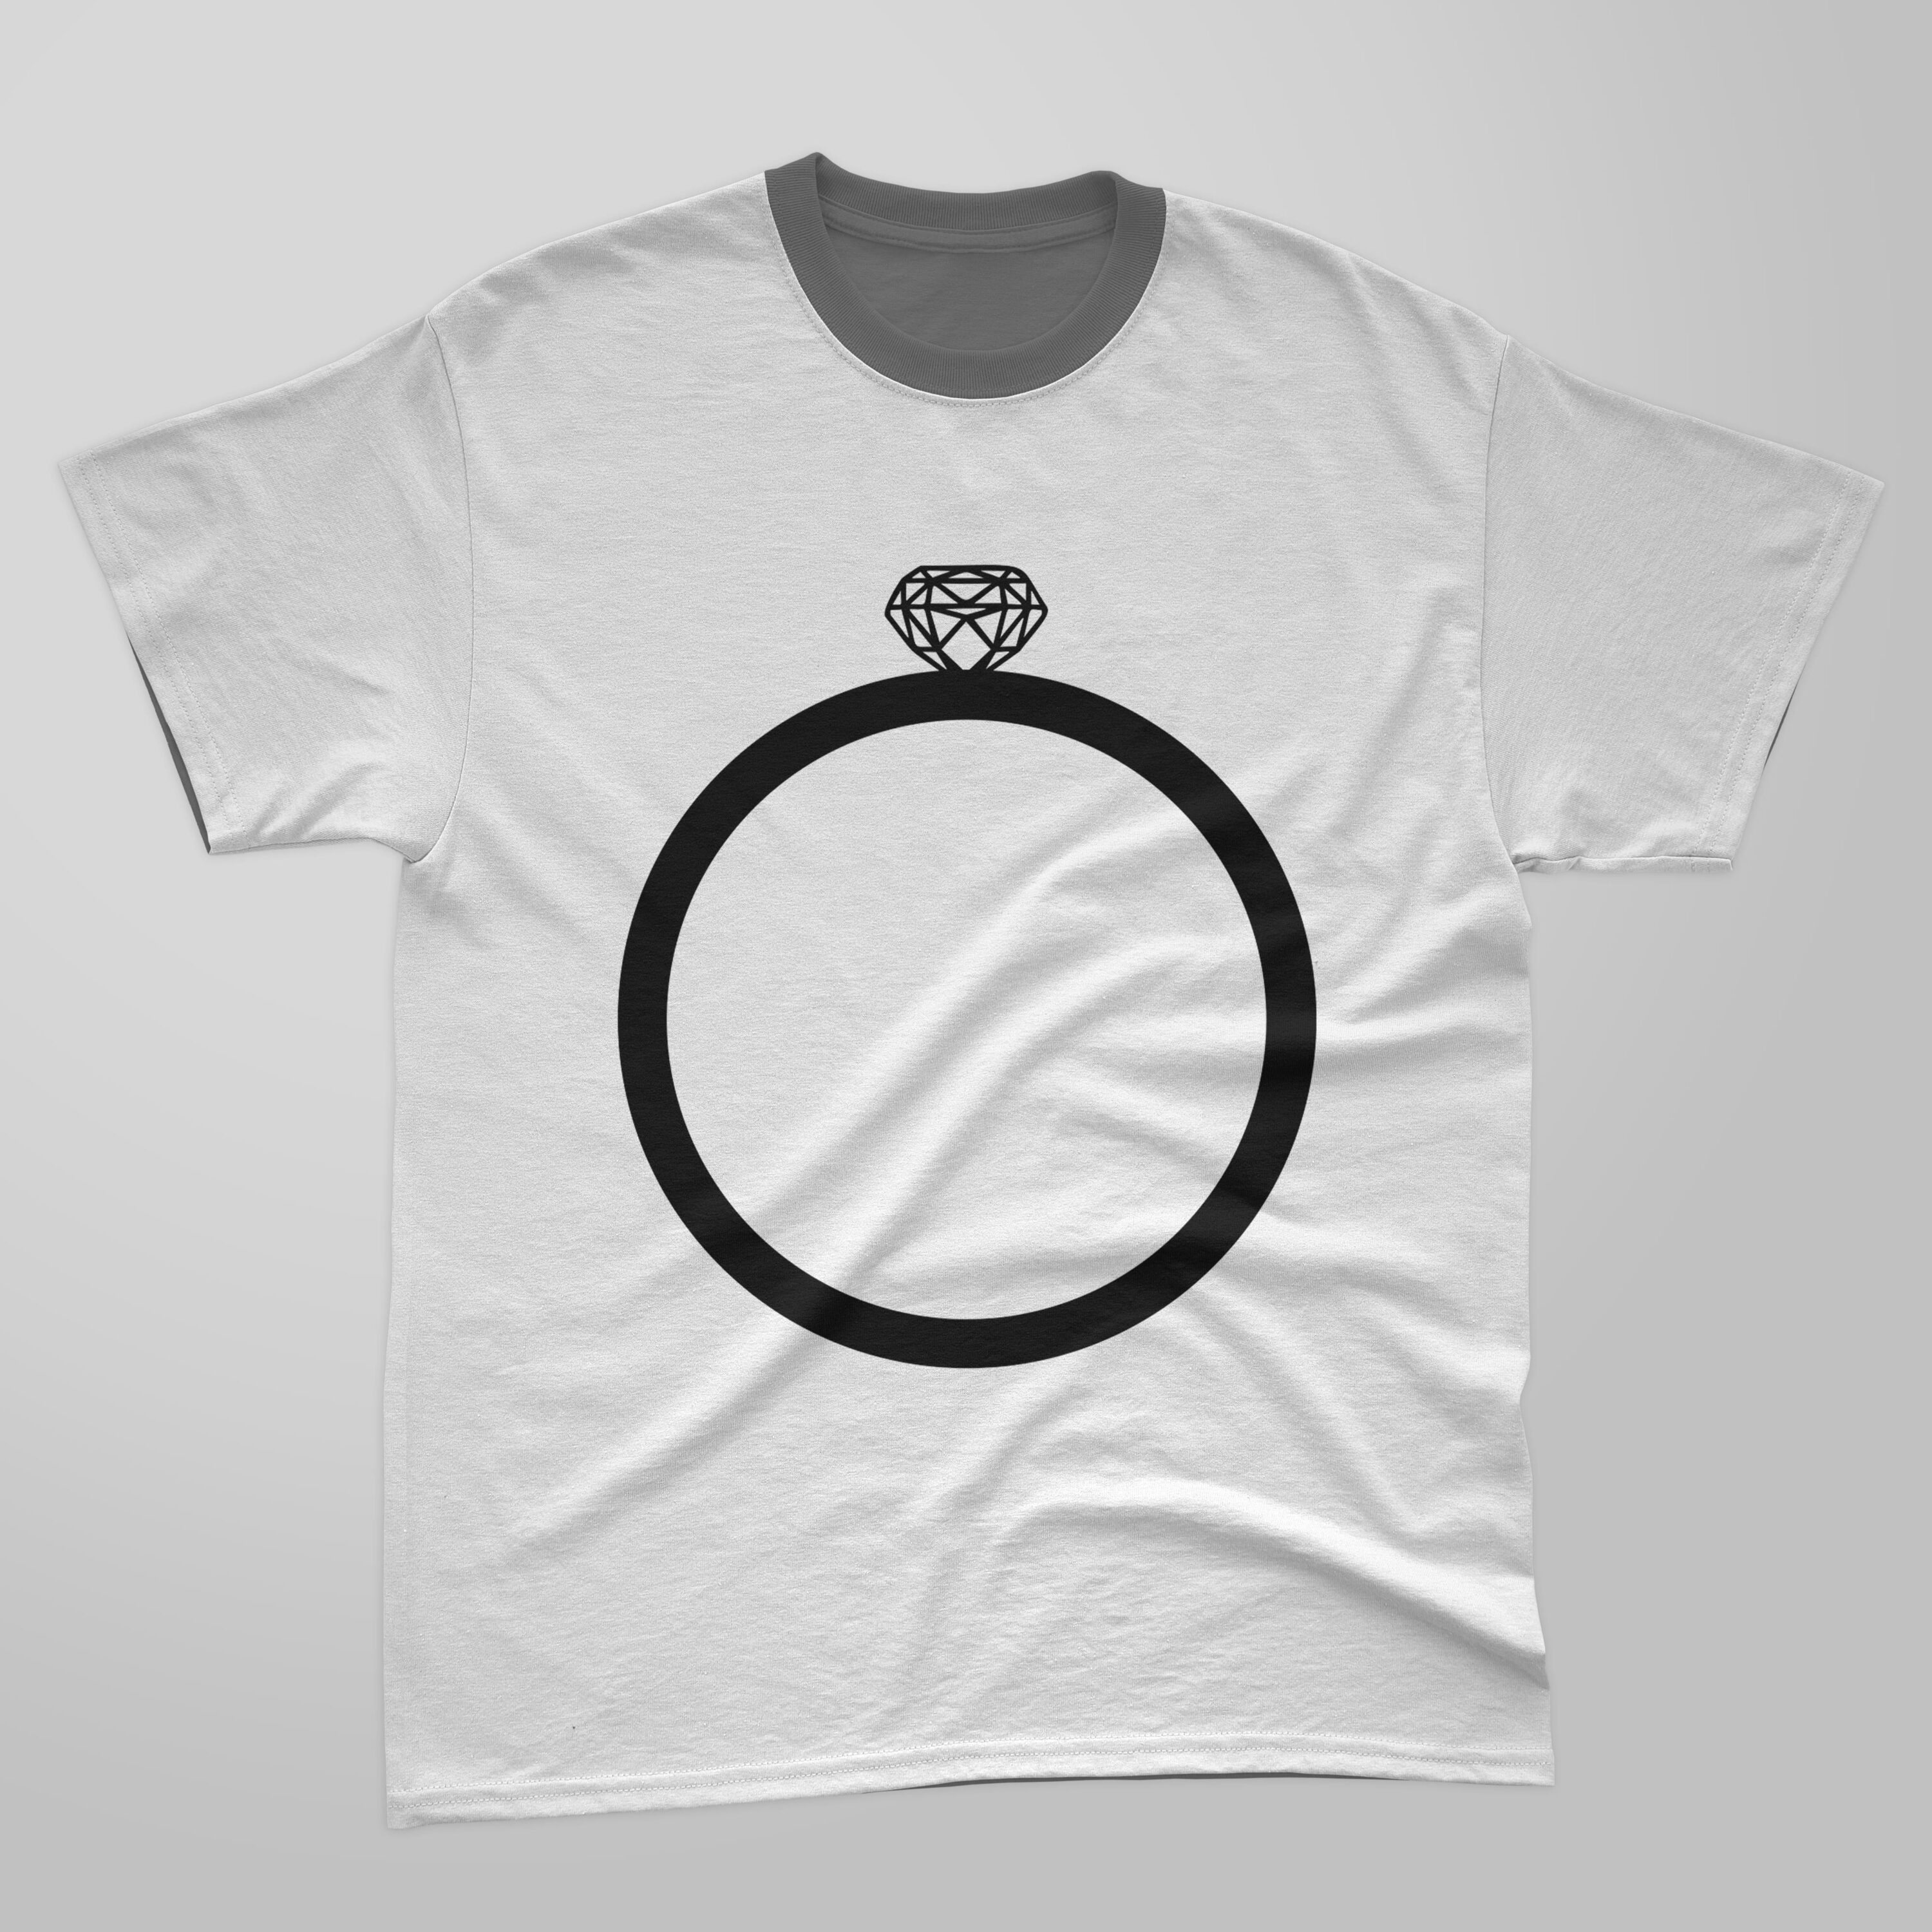 Image of t-shirt with amazing print of diamond ring silhouette.